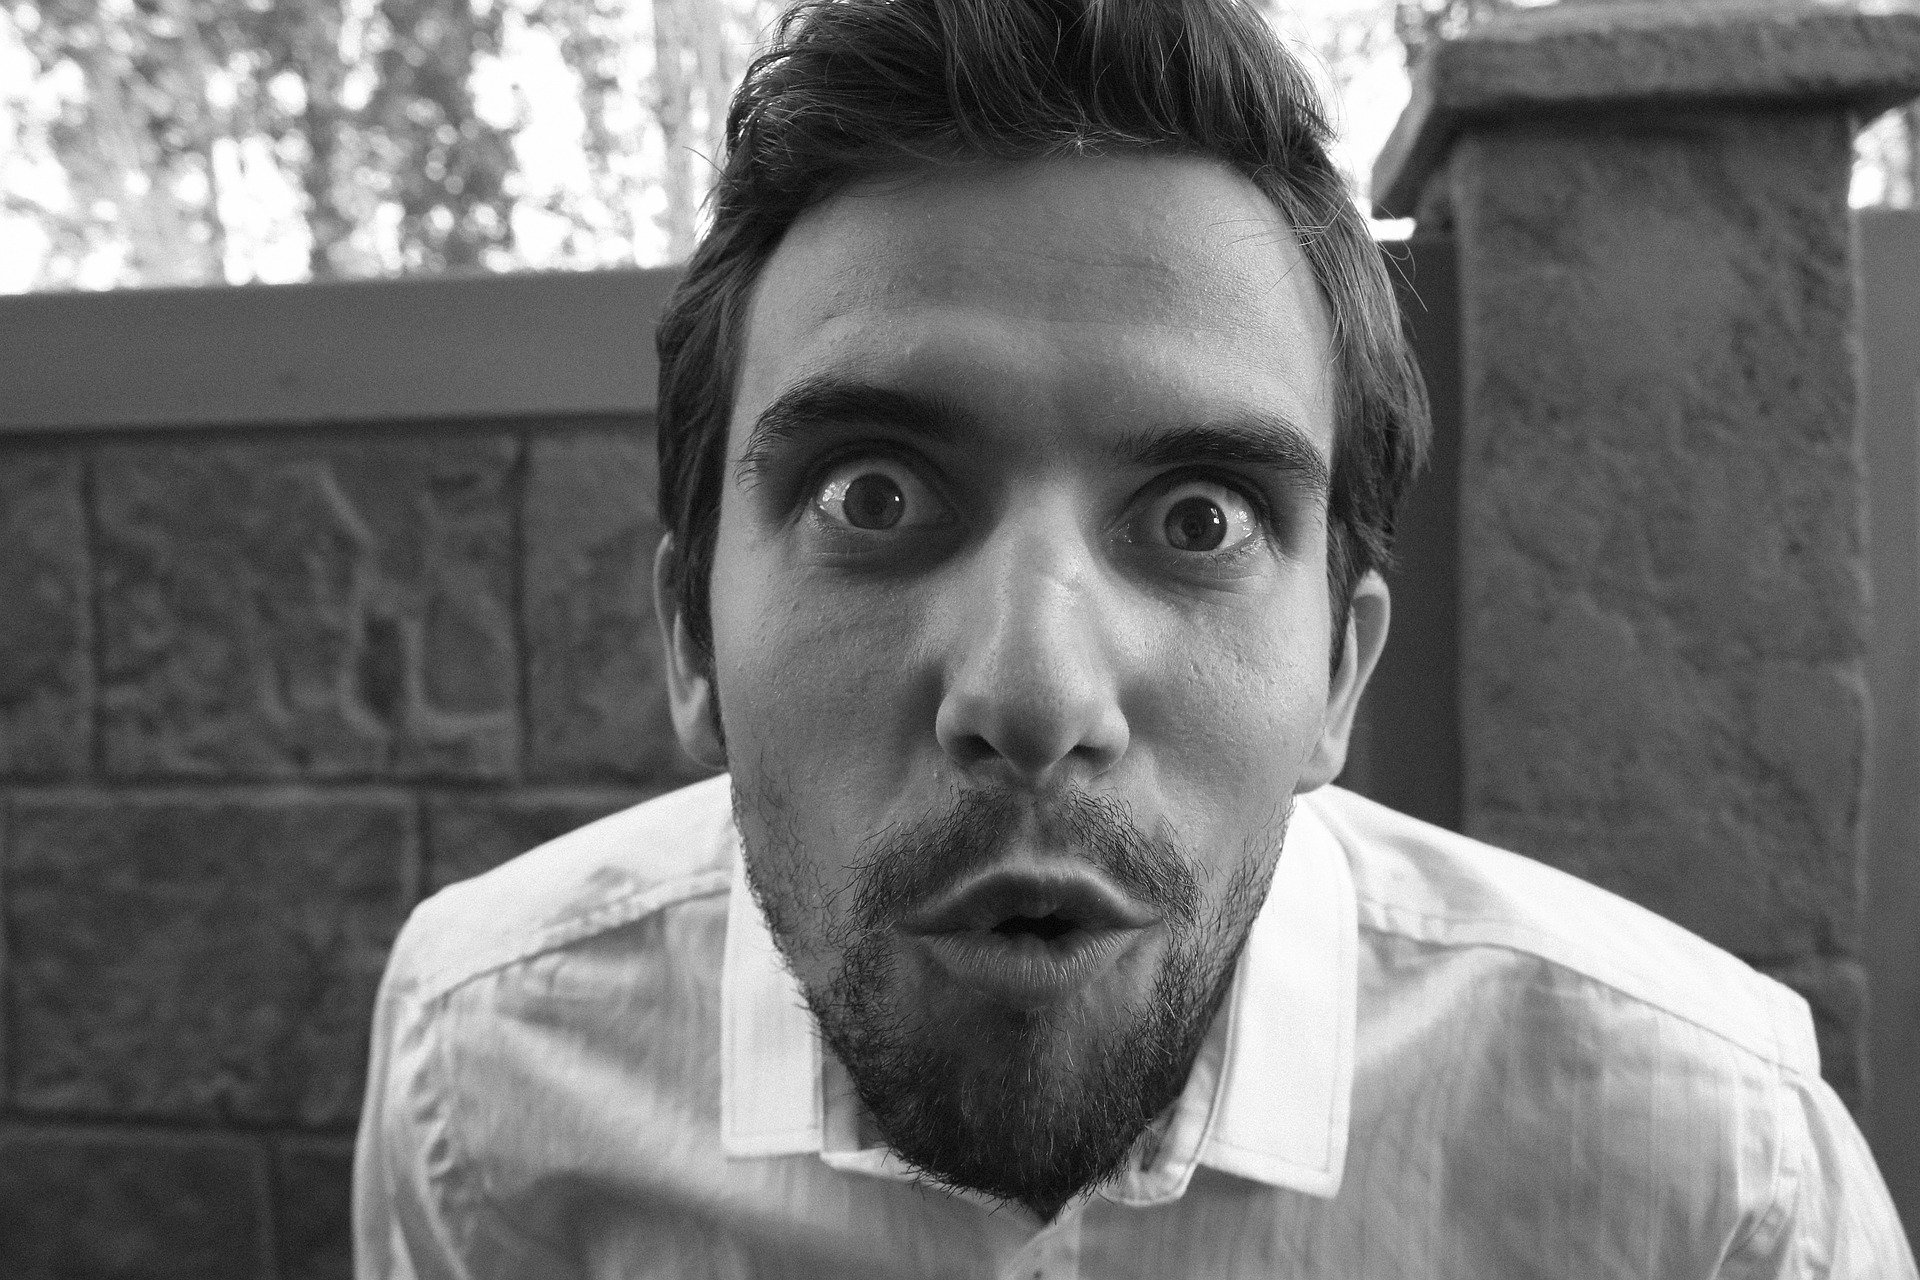 A black-and-white image of a man with a funny expression on his face | Photo: Pixabay/Olya Adamovich